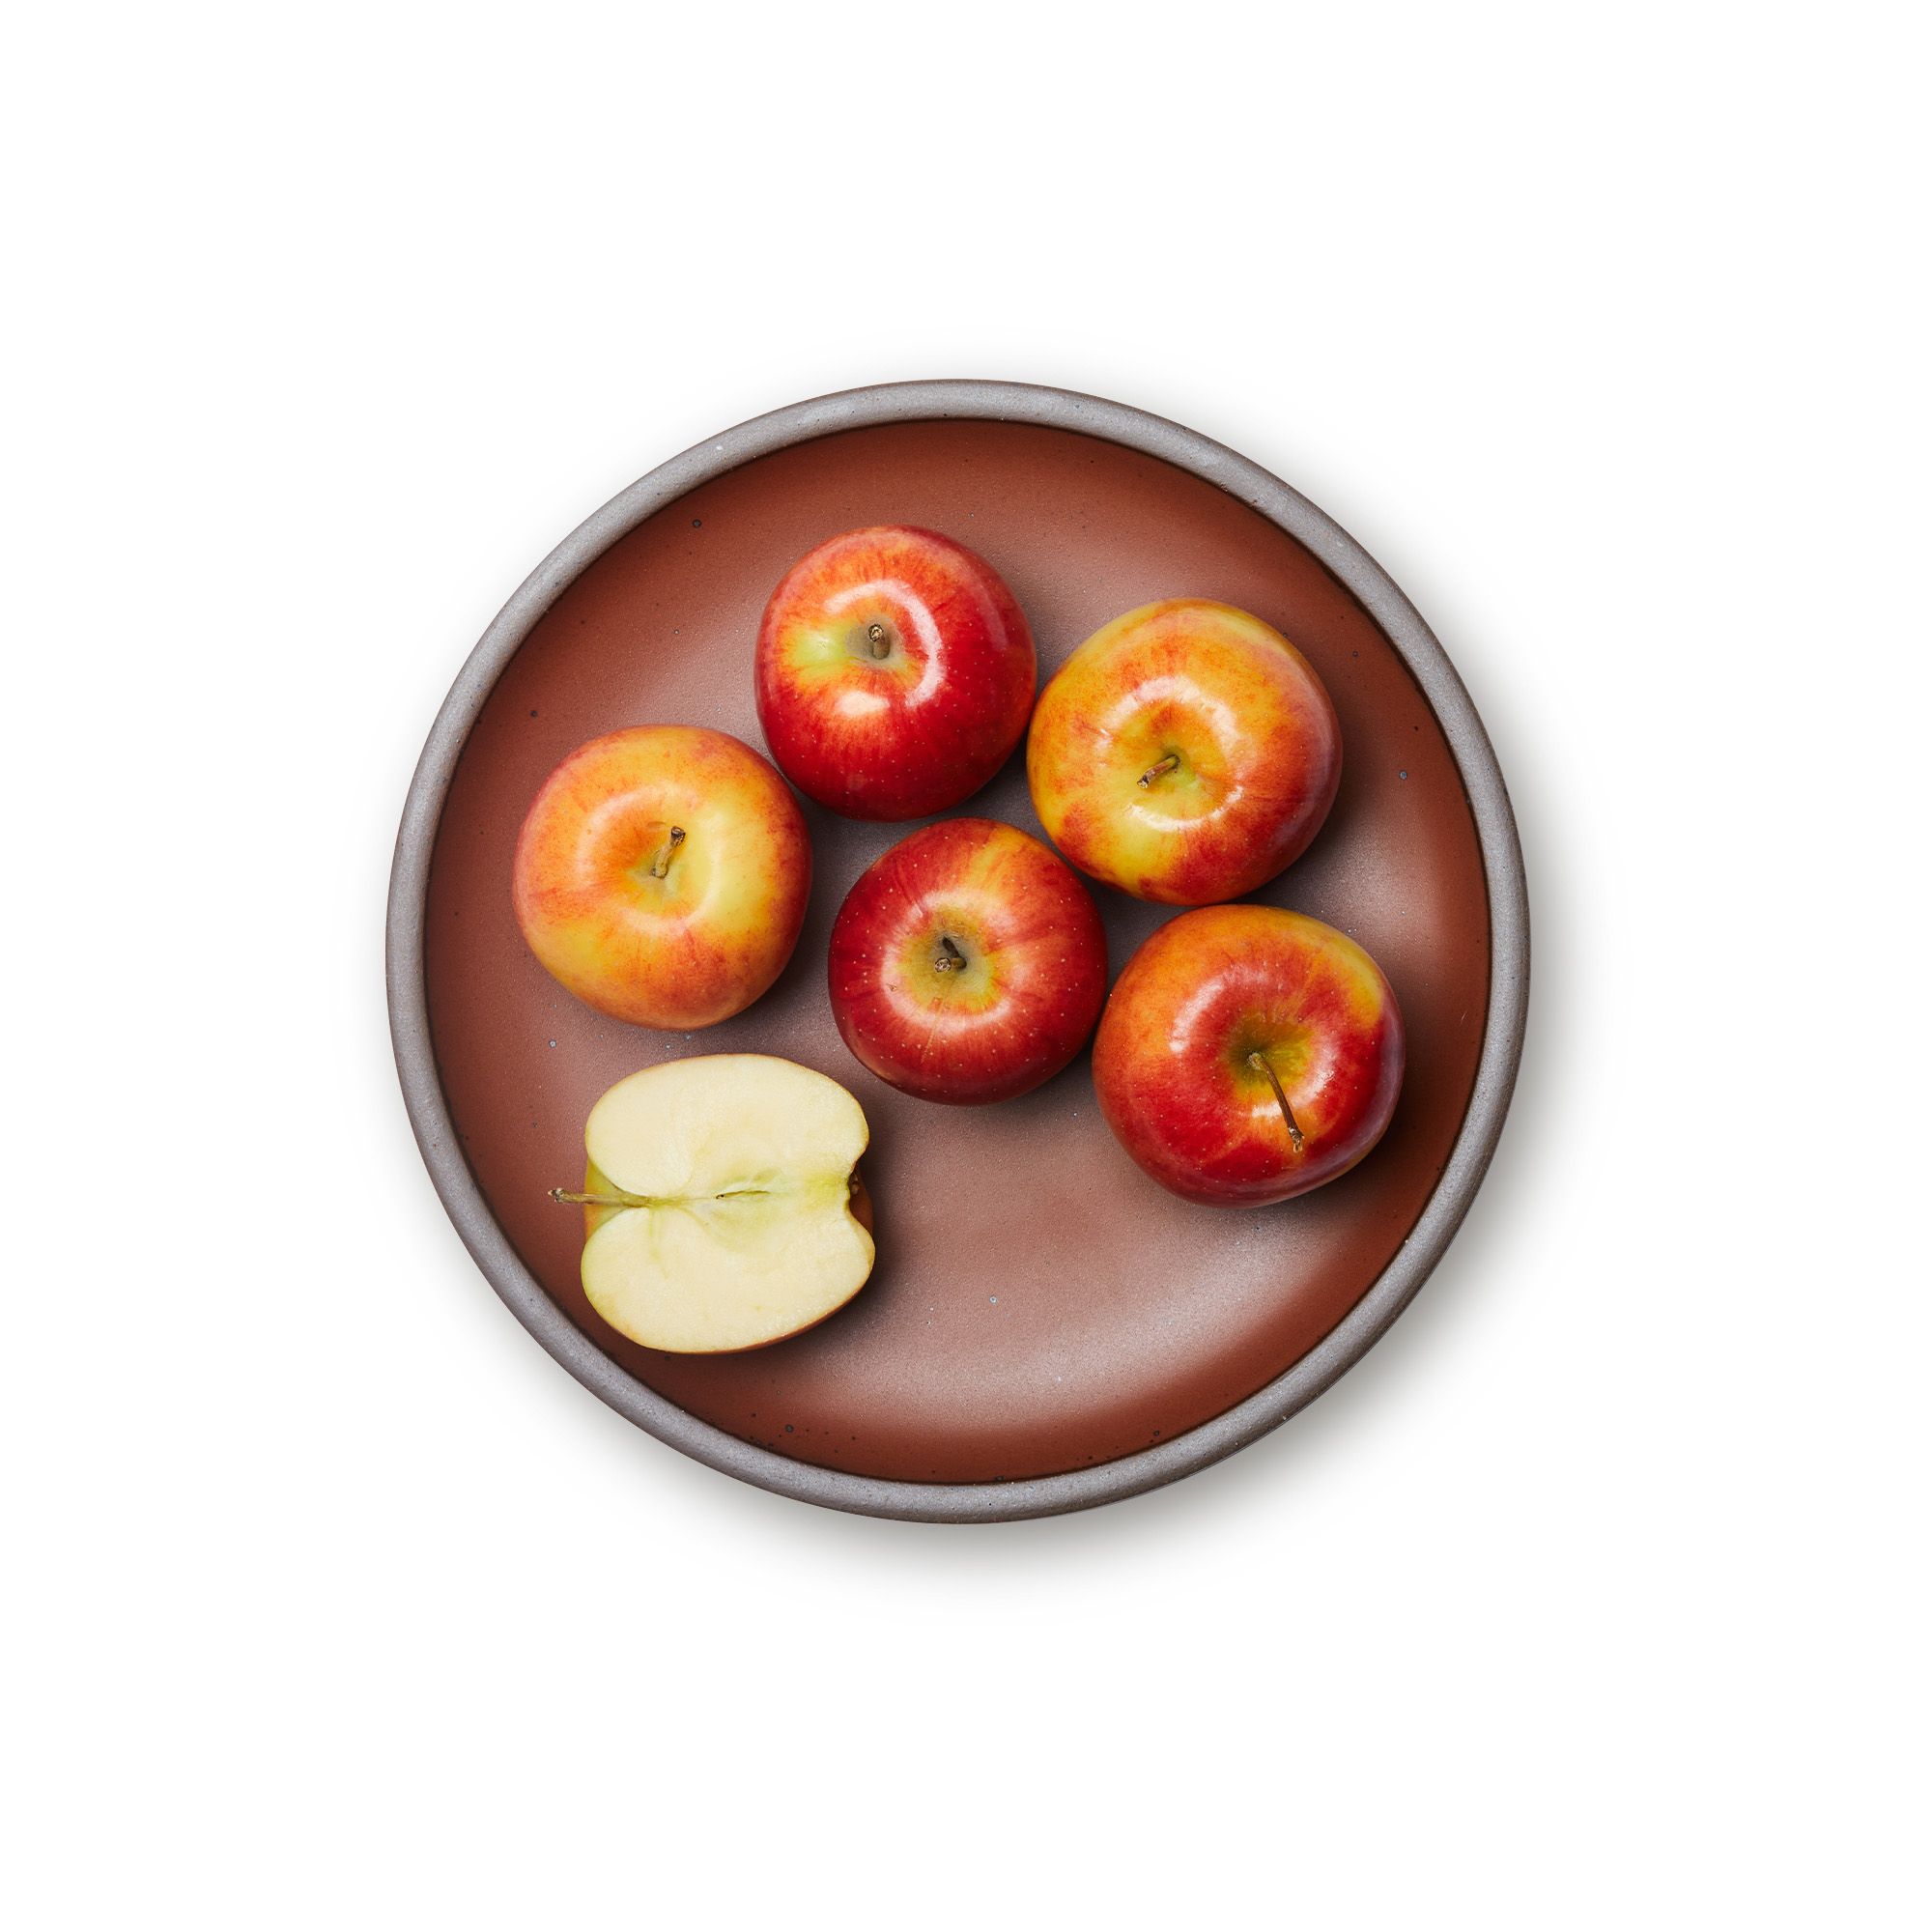 Apples on a dinner sized ceramic plate in a cool burnt terracotta color featuring iron speckles and an unglazed rim.